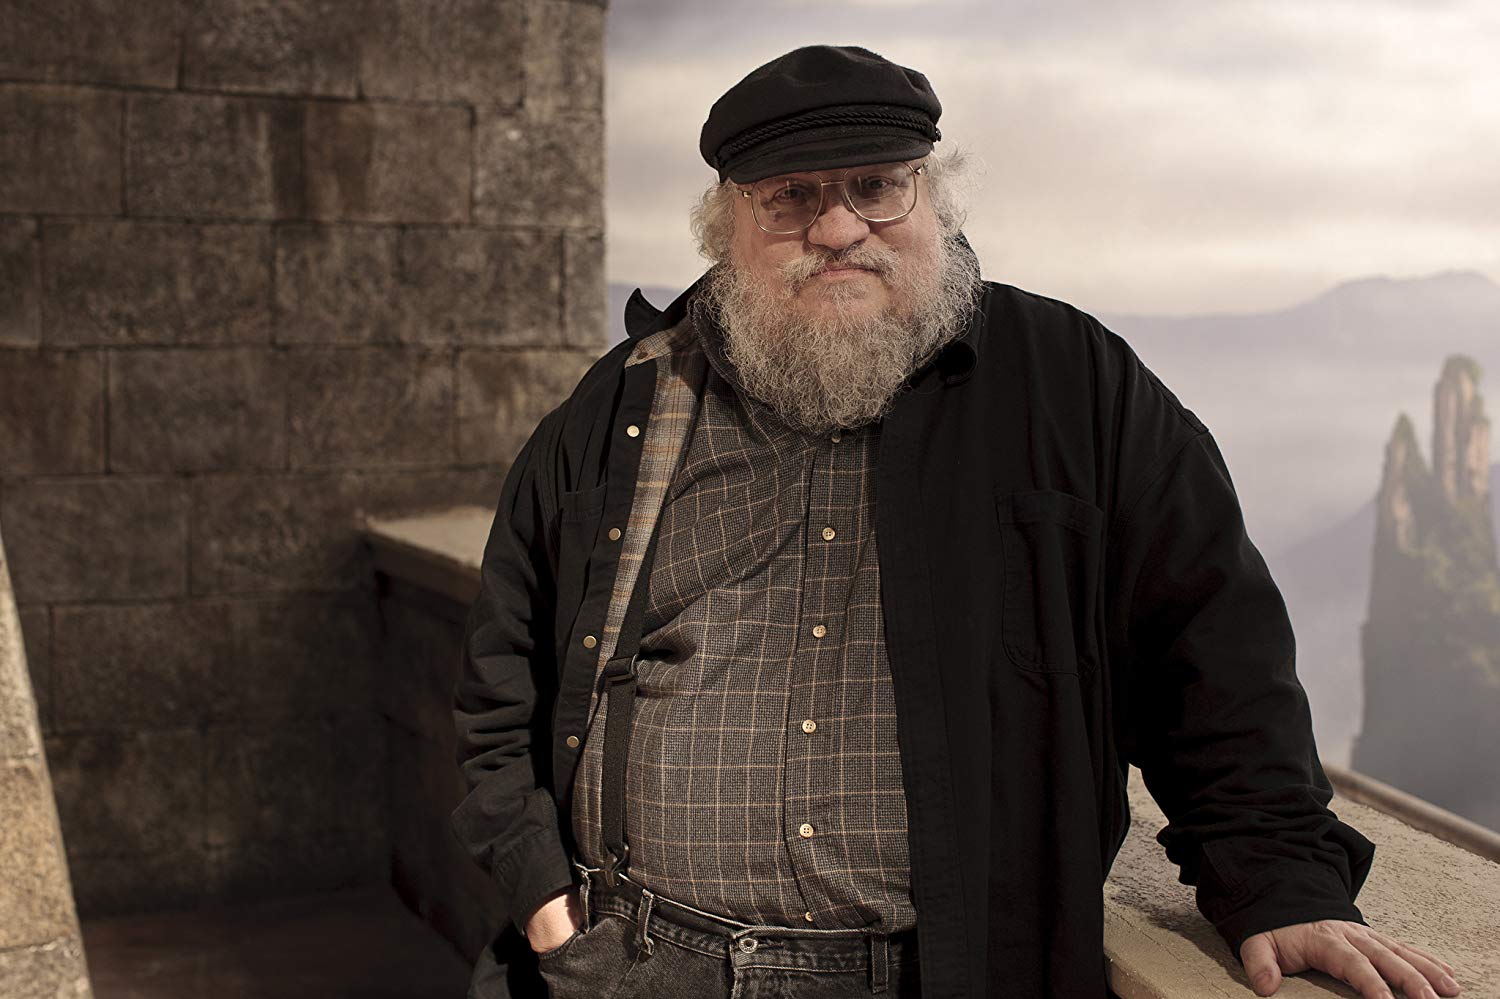 George R.R. Martin, author of the A Song of Fire and Ice book series that is the source of Game of Thrones